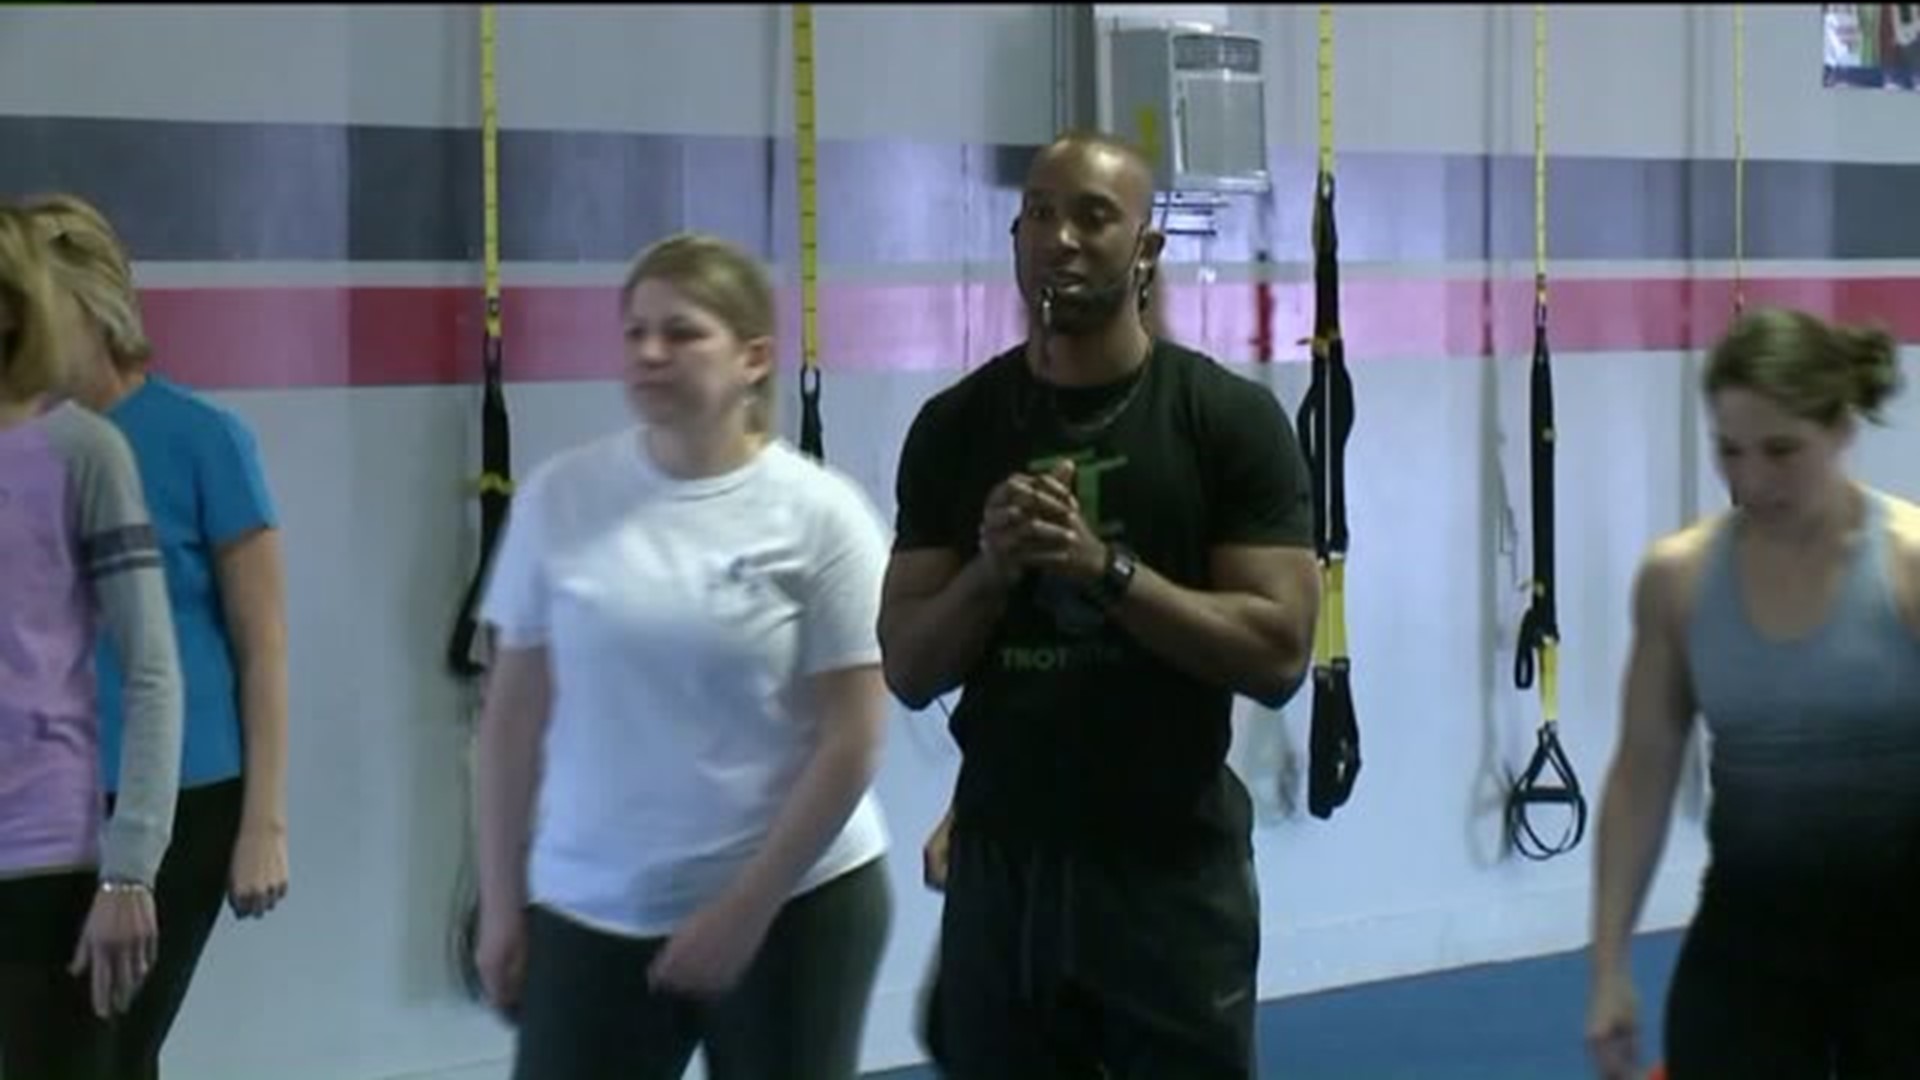 Local Trainer Up For International Award